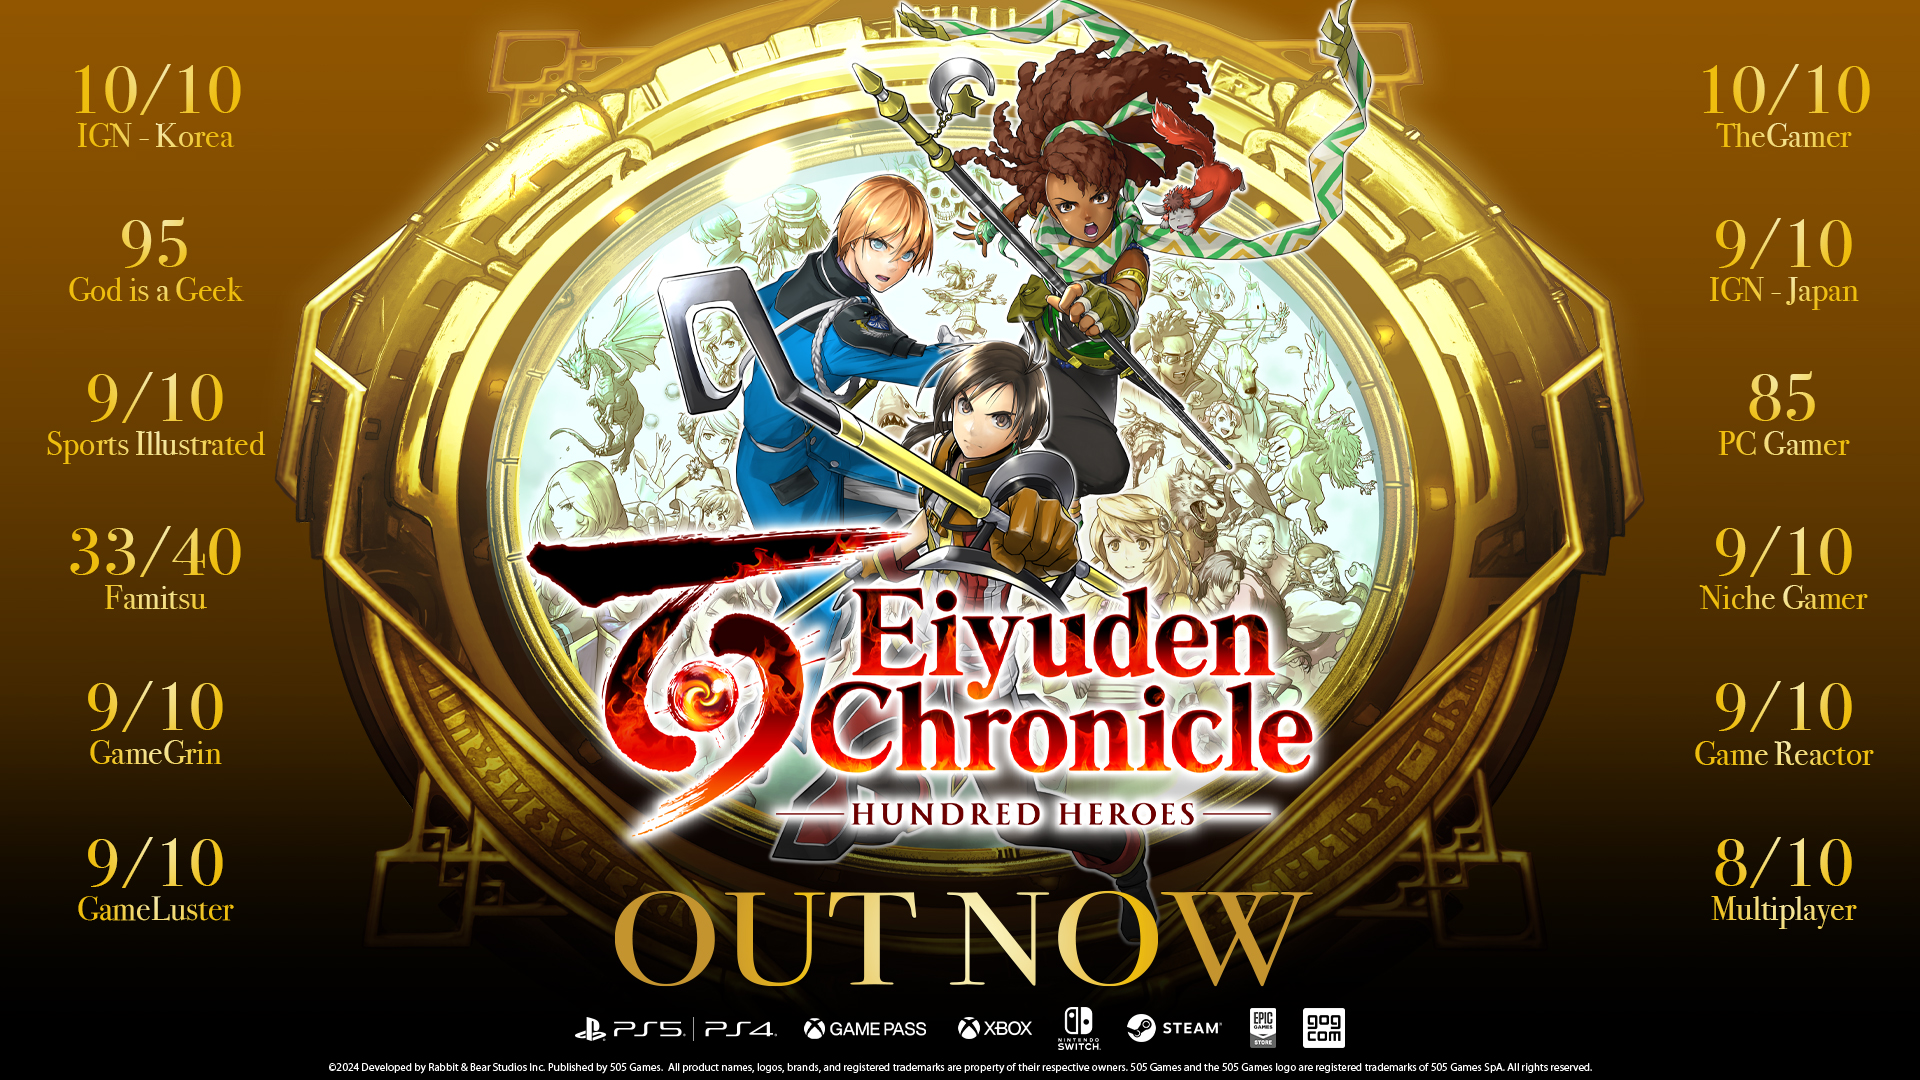 Incredible Accolades for Eiyuden Chronicle: Hundred Heroes and FAQ Guide